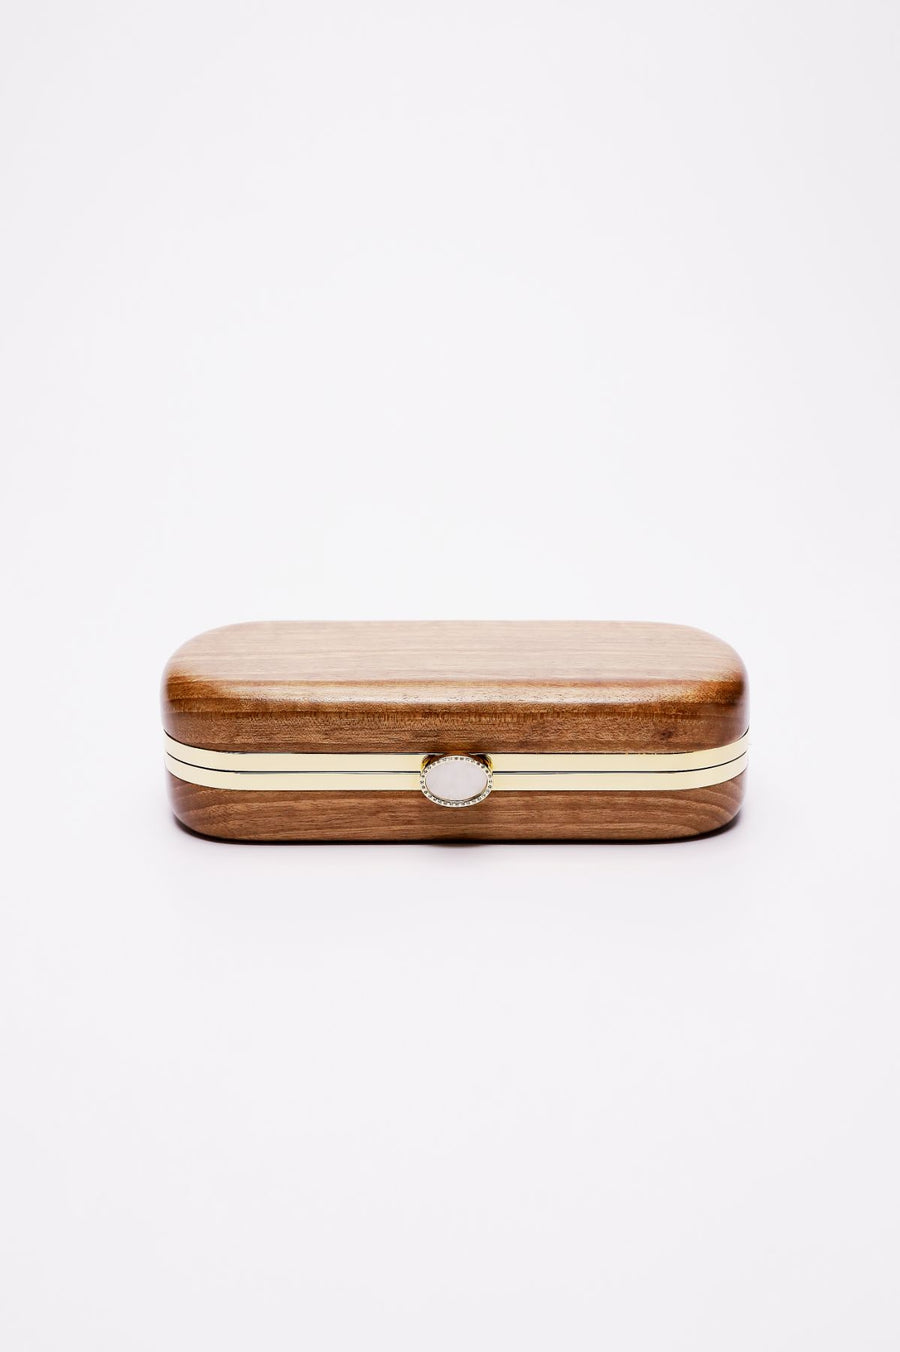 Top closed view of Bella Clutch in solid Walnut Wood body with gold hardware frame.